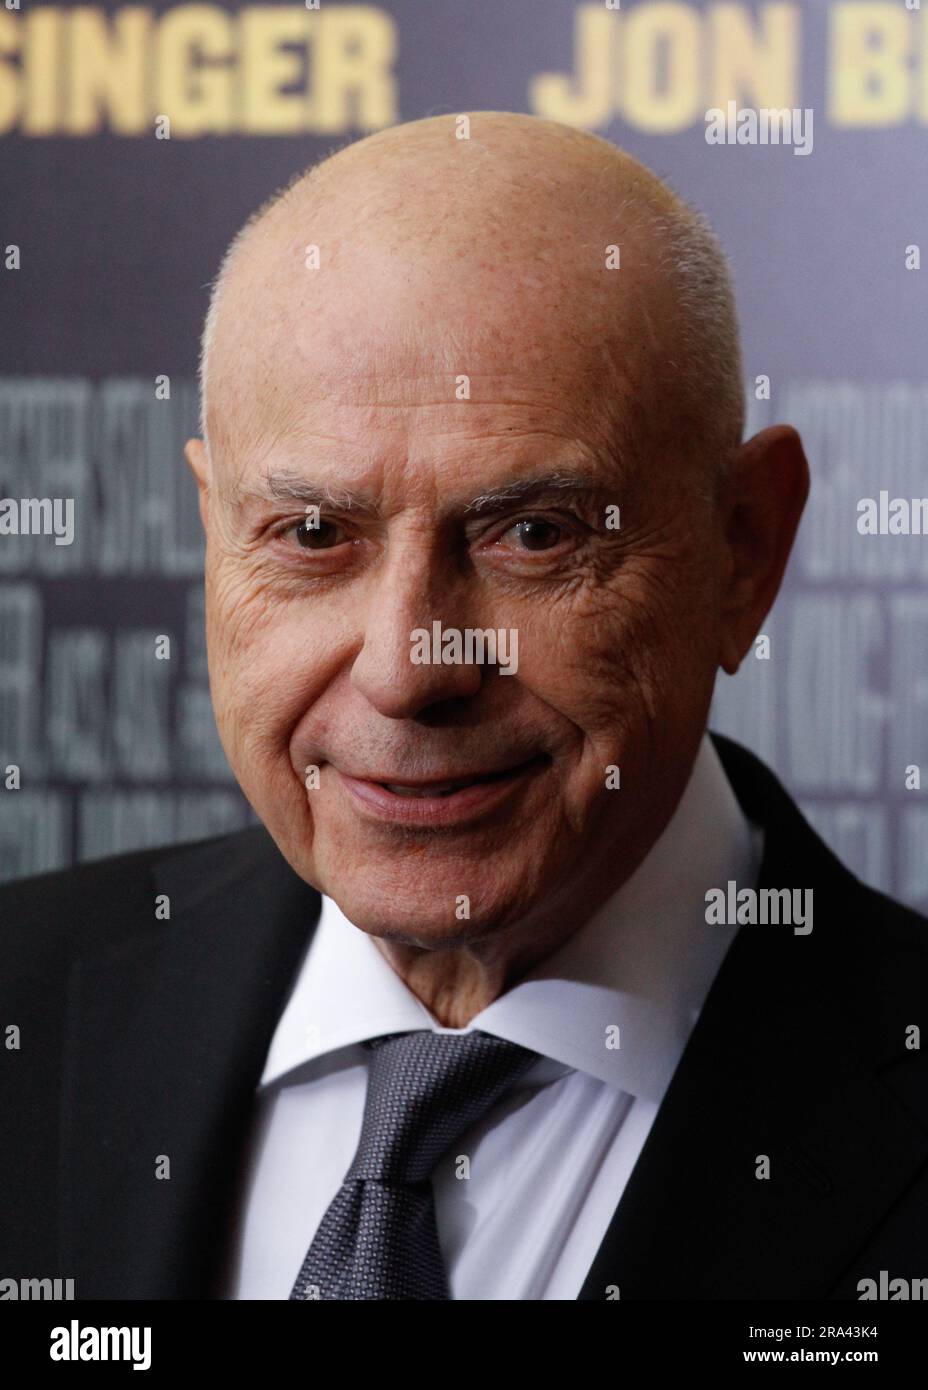 Actor Alan Arkin attends the 'Grudge Match' screening benifiting the Tribeca Film Insititute at Ziegfeld Theater on December 16, 2013 in New York City Stock Photo